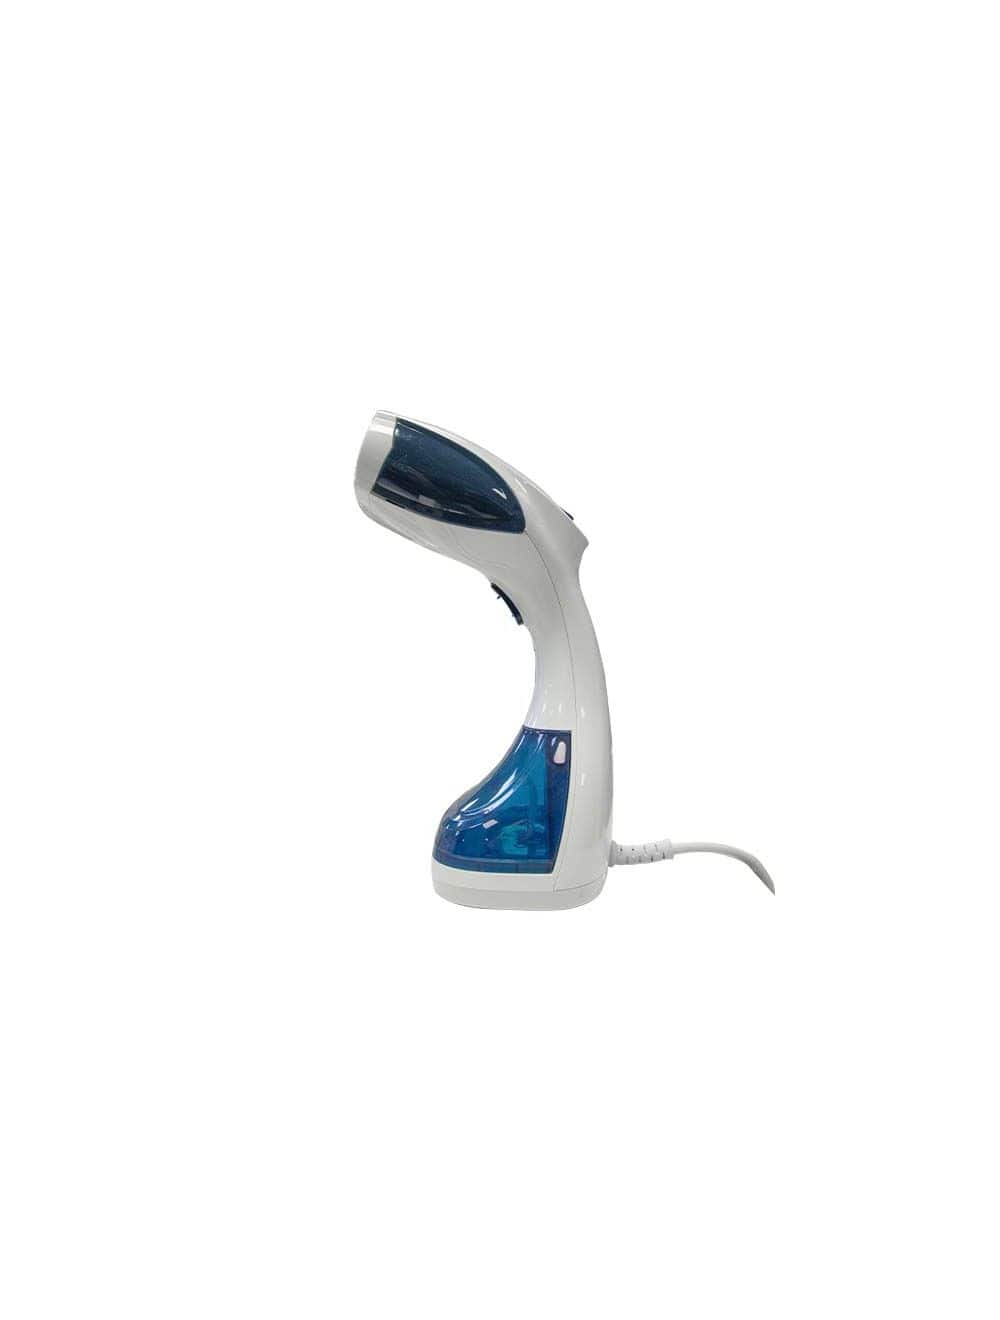 Buy Decakila Handle Garment Steamer 1500W - KEEN003W Online in Ghana - Supply Master Electric Iron Buy Tools hardware Building materials